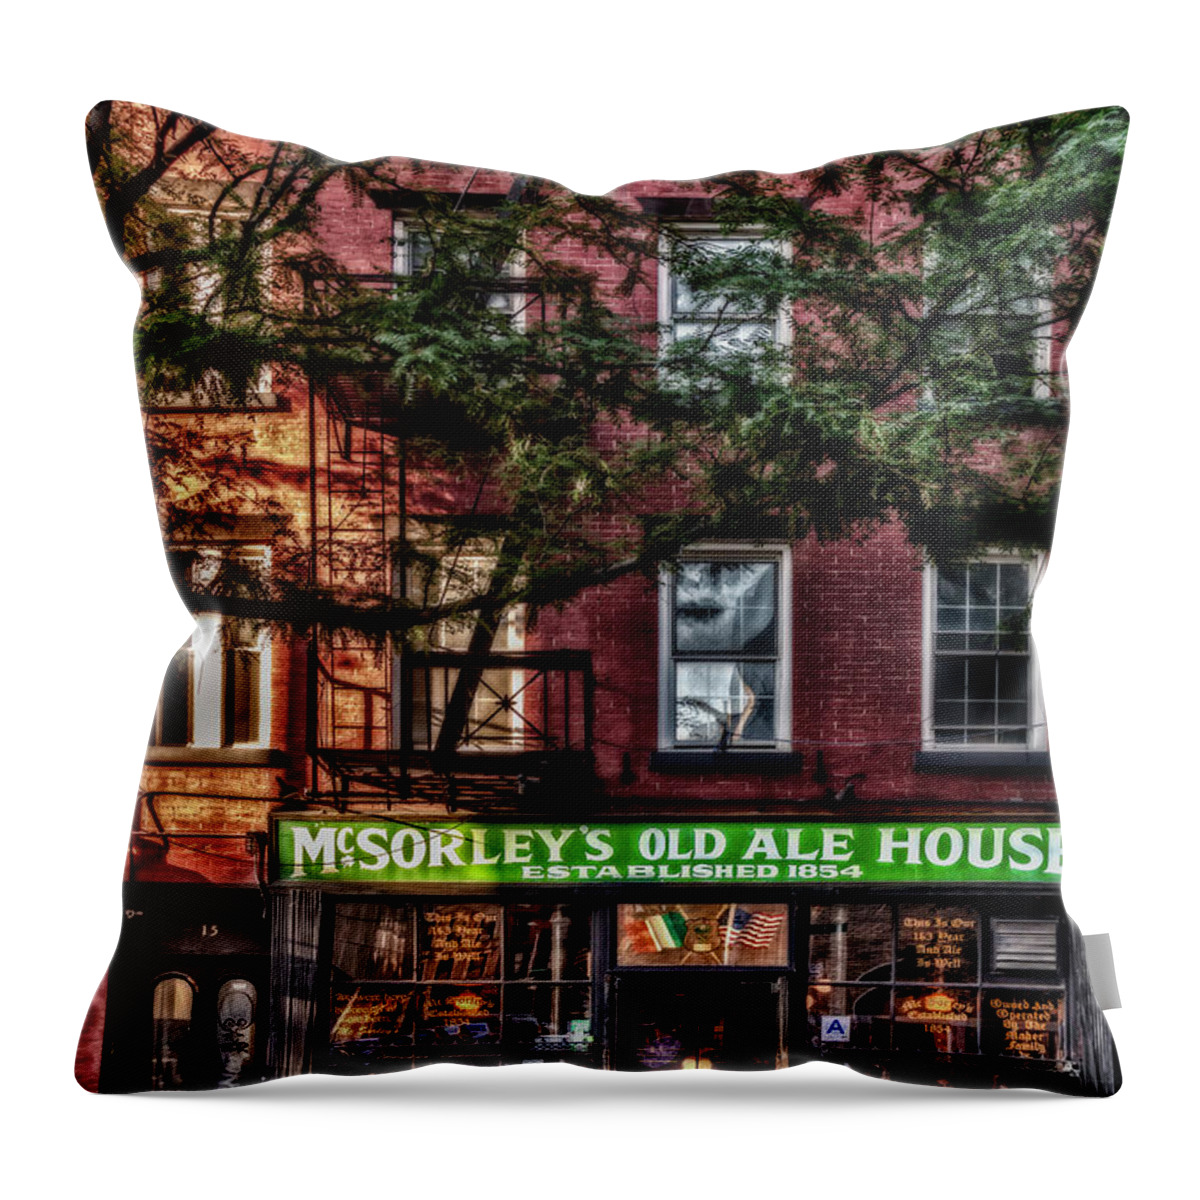 Mcsorley's Old Ale House Throw Pillow featuring the photograph McSorley's Old Ale House NYC by Susan Candelario